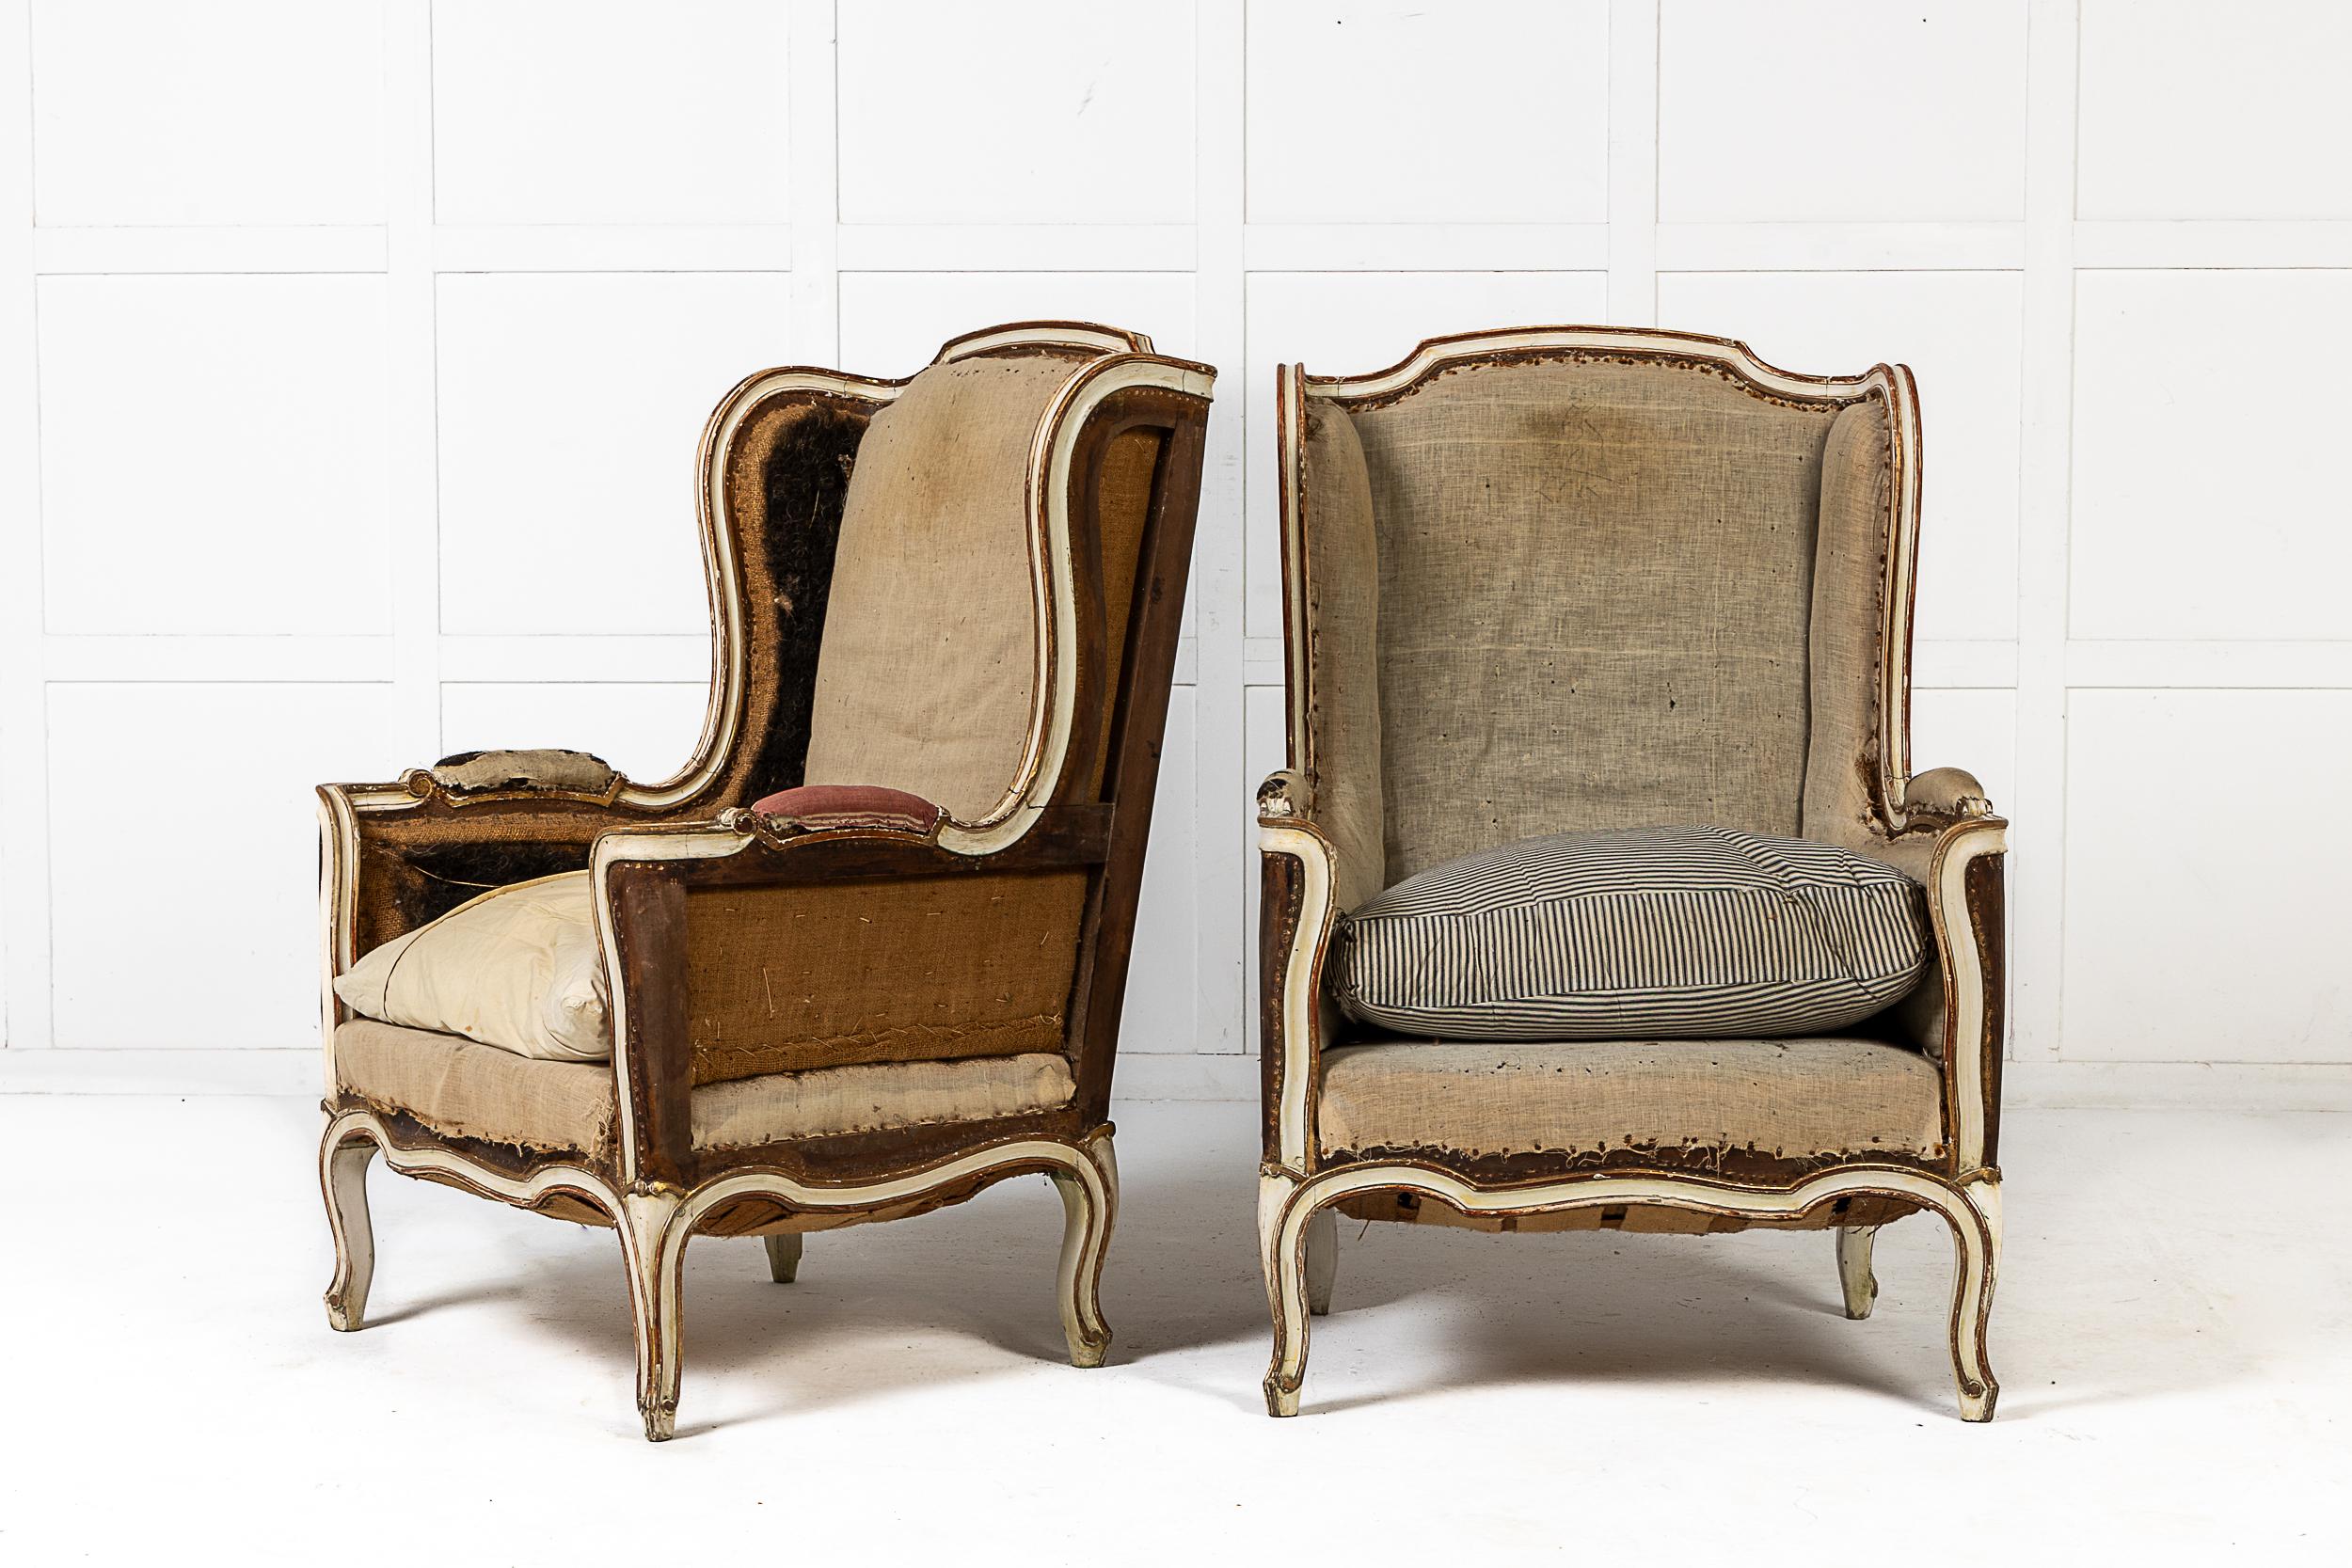 A Good Pair of French 19th Century Bergère or Wing Armchairs.

The part painted surfaces with parcel gilt highlights and the front rails of gentle serpentine form. Ready for the client to upholster in a fabric of their choice.
